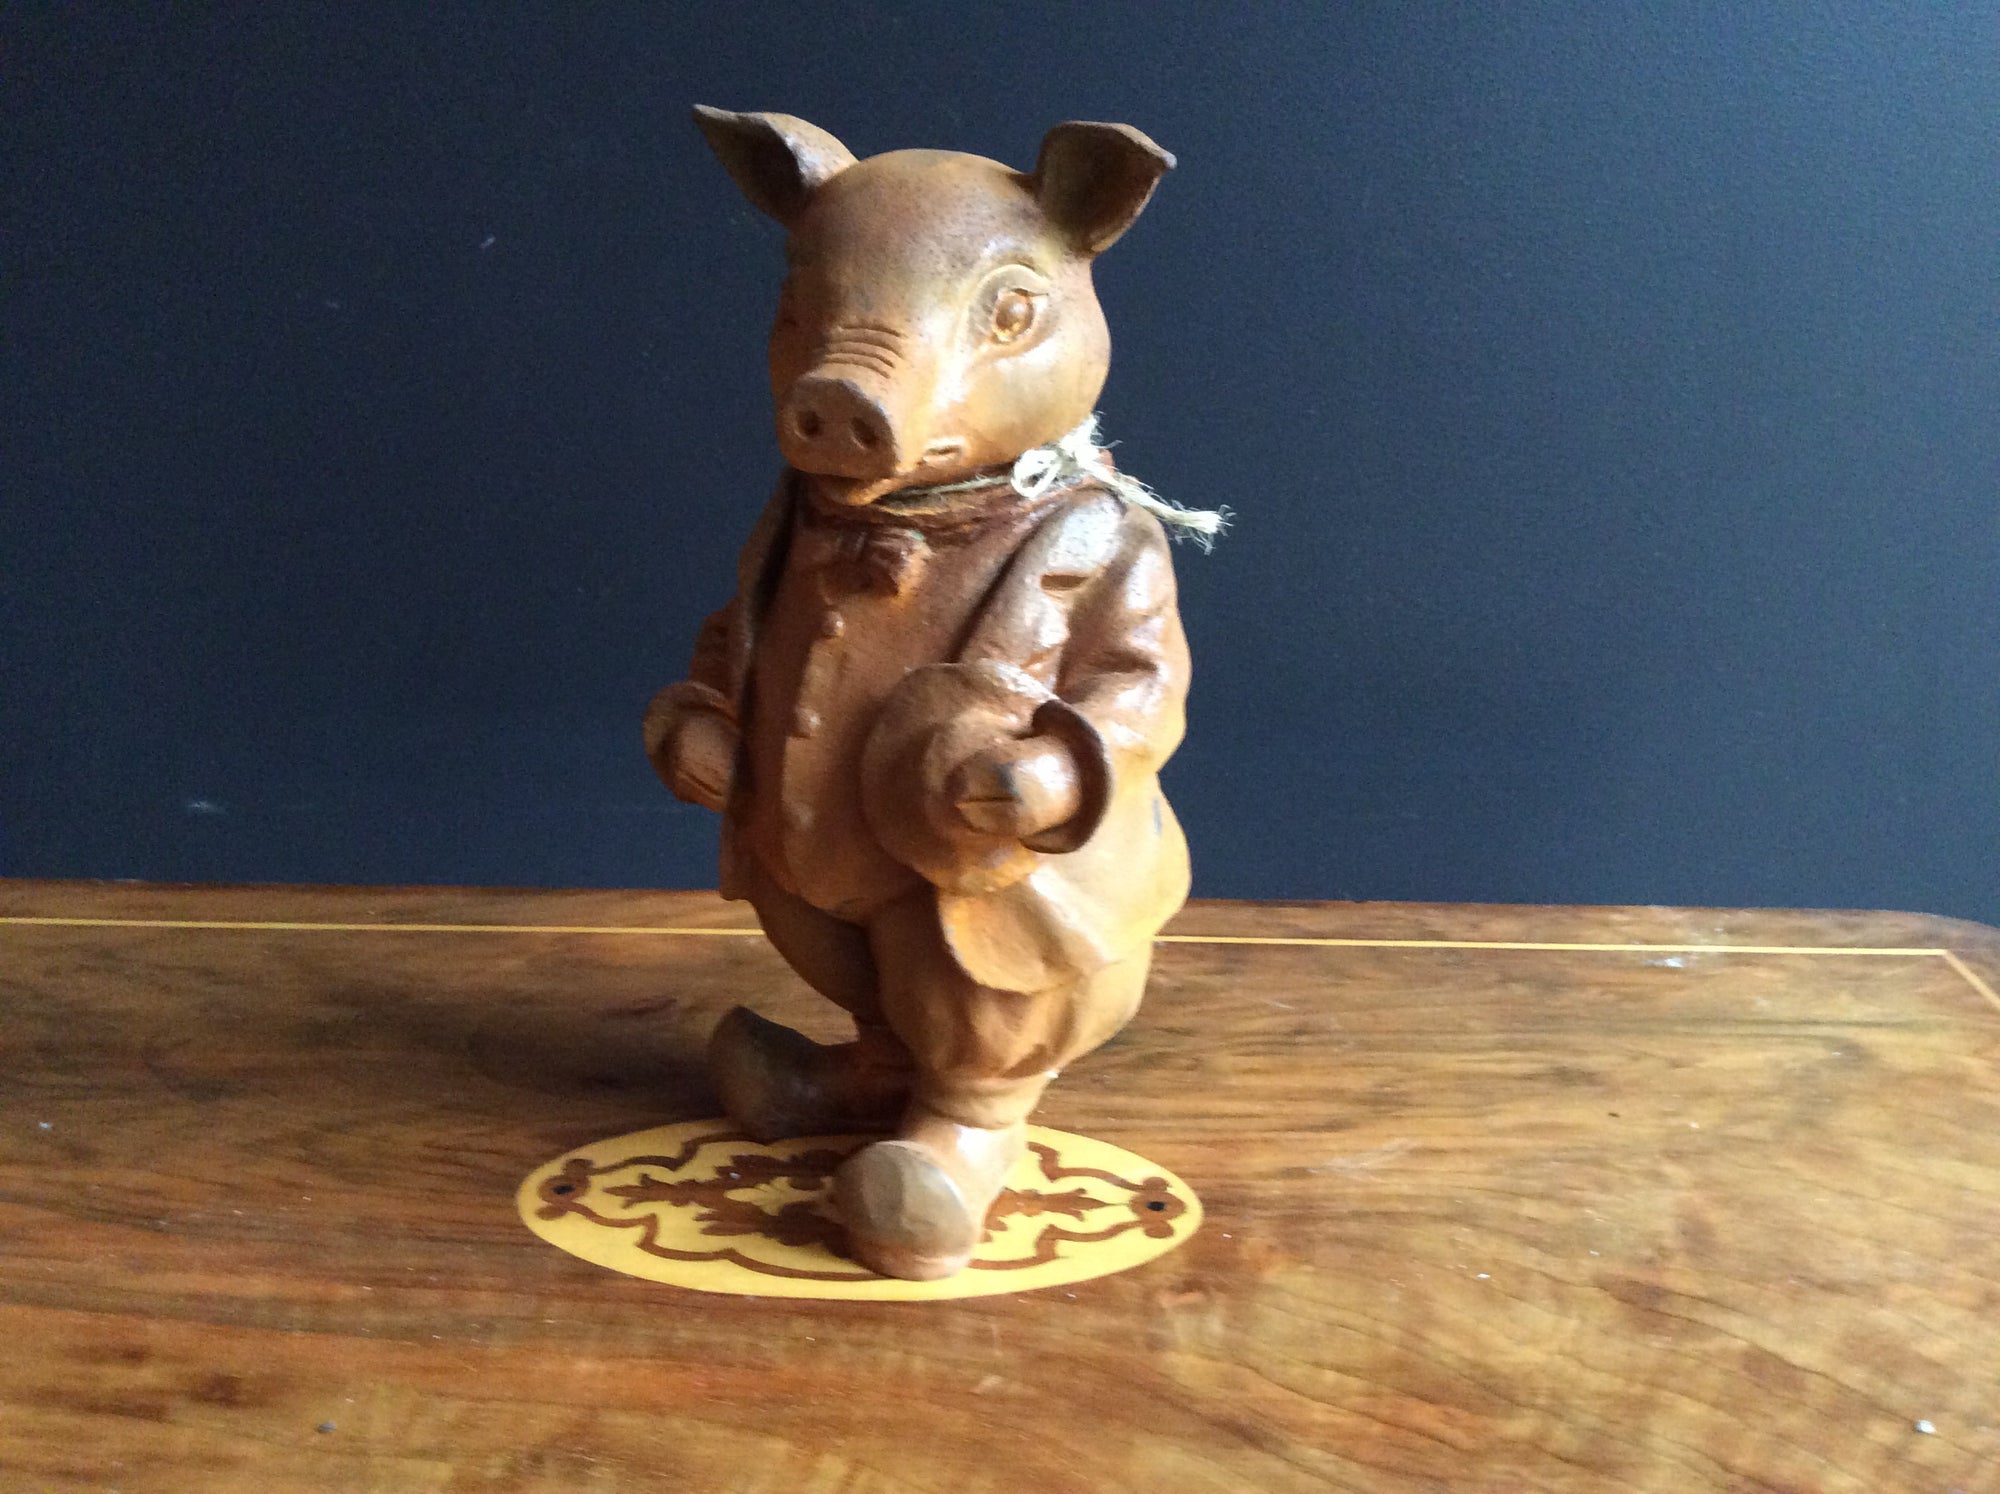   Cast Iron Pig from Willows